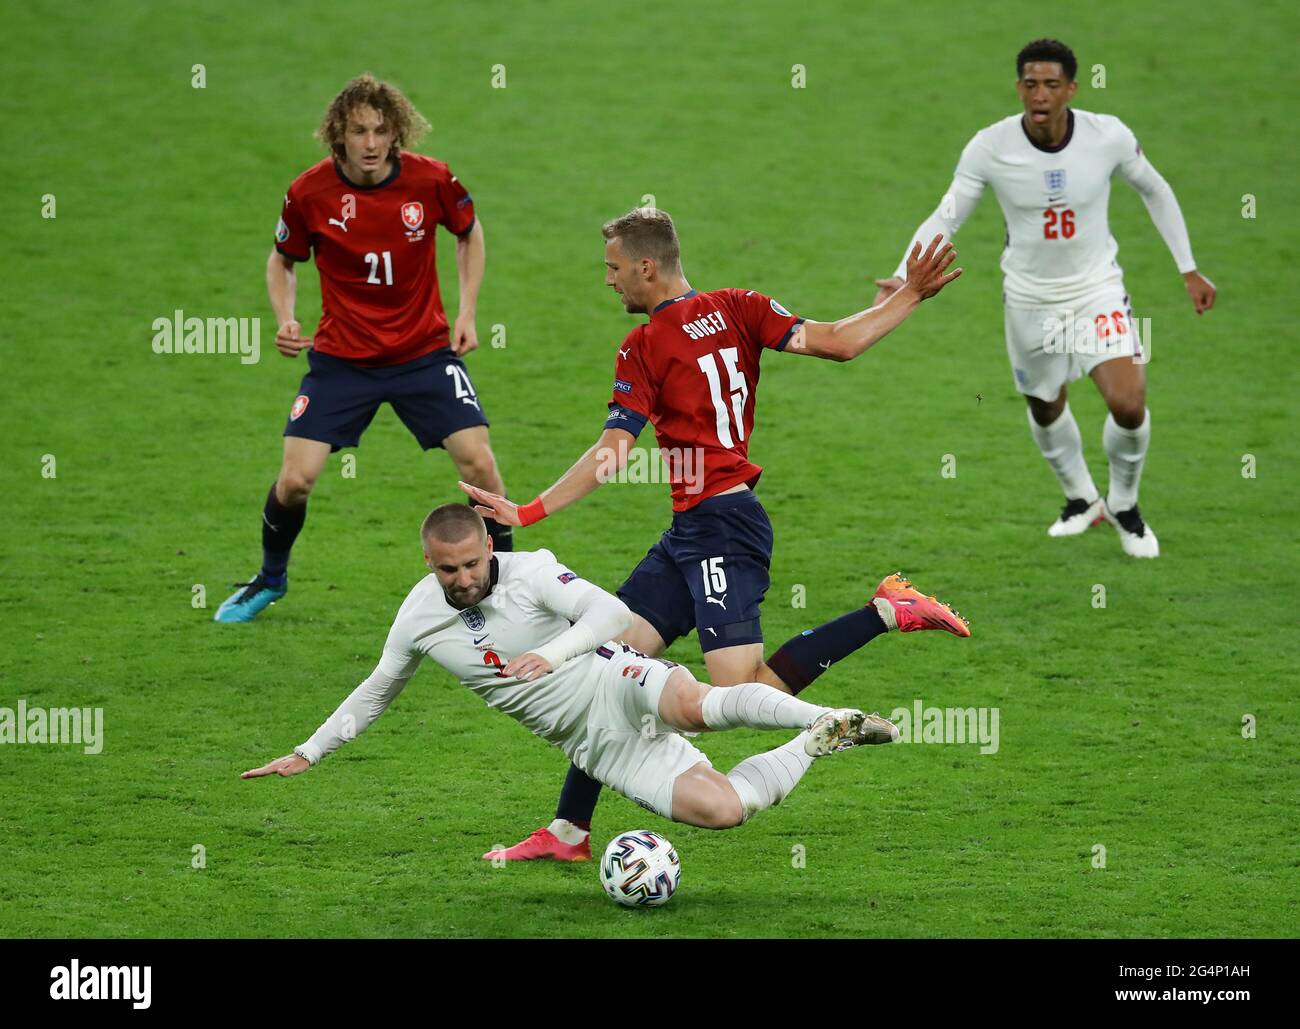 London, England, 22nd June 2021. Luke Shaw of England tackled by Tomas Soucek of Czech Republic during the UEFA European Championships match at Wembley Stadium, London. Picture credit should read: David Klein / Sportimage Stock Photo